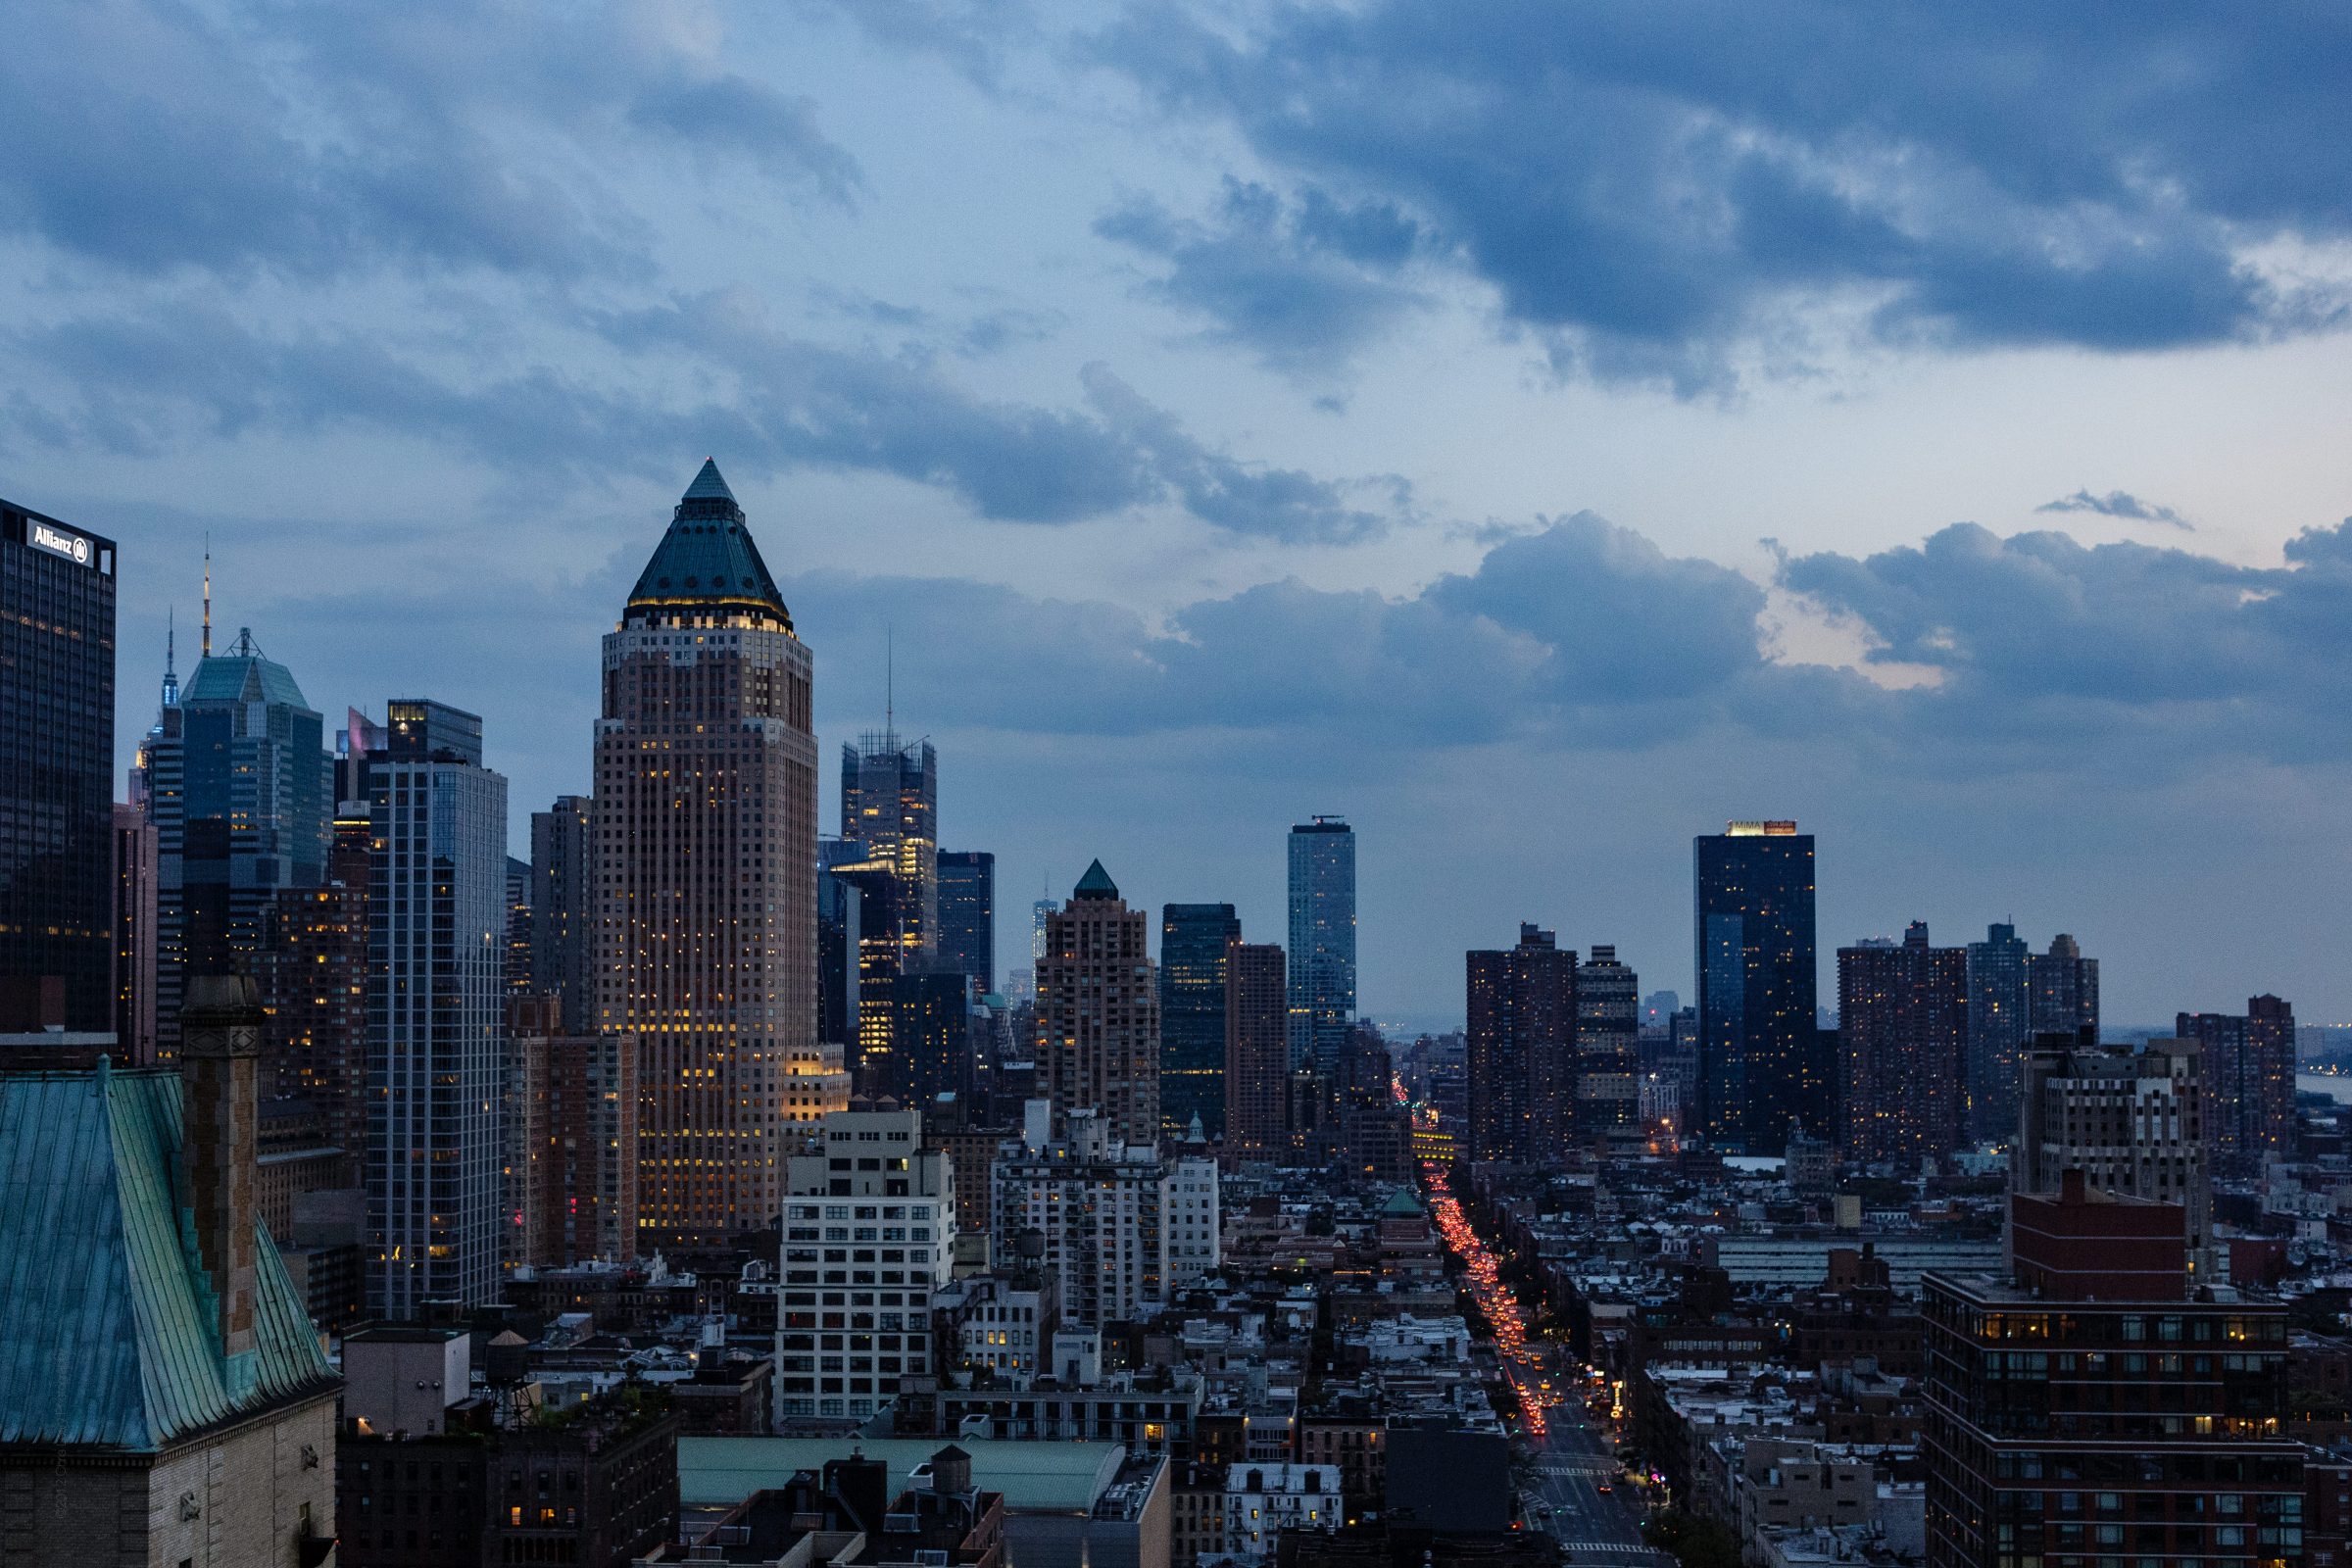 Cityscape Photography | New York City Pictures - Chris Leary Photography